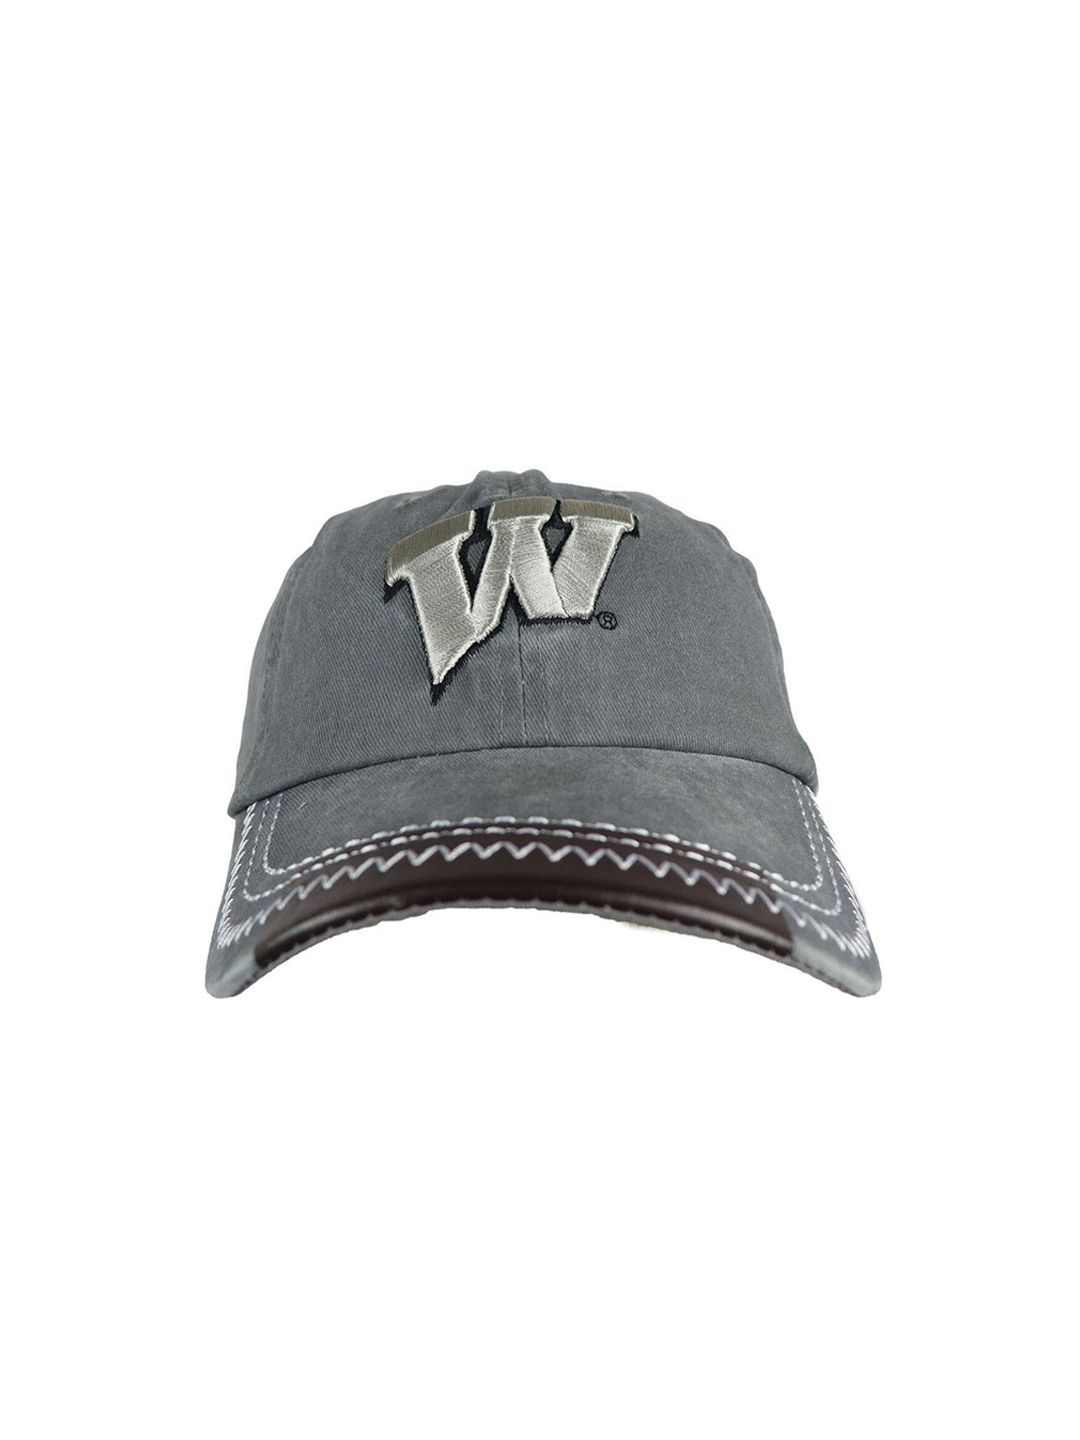 iSWEVEN Unisex Grey Embroidered Snapback Cap Price in India